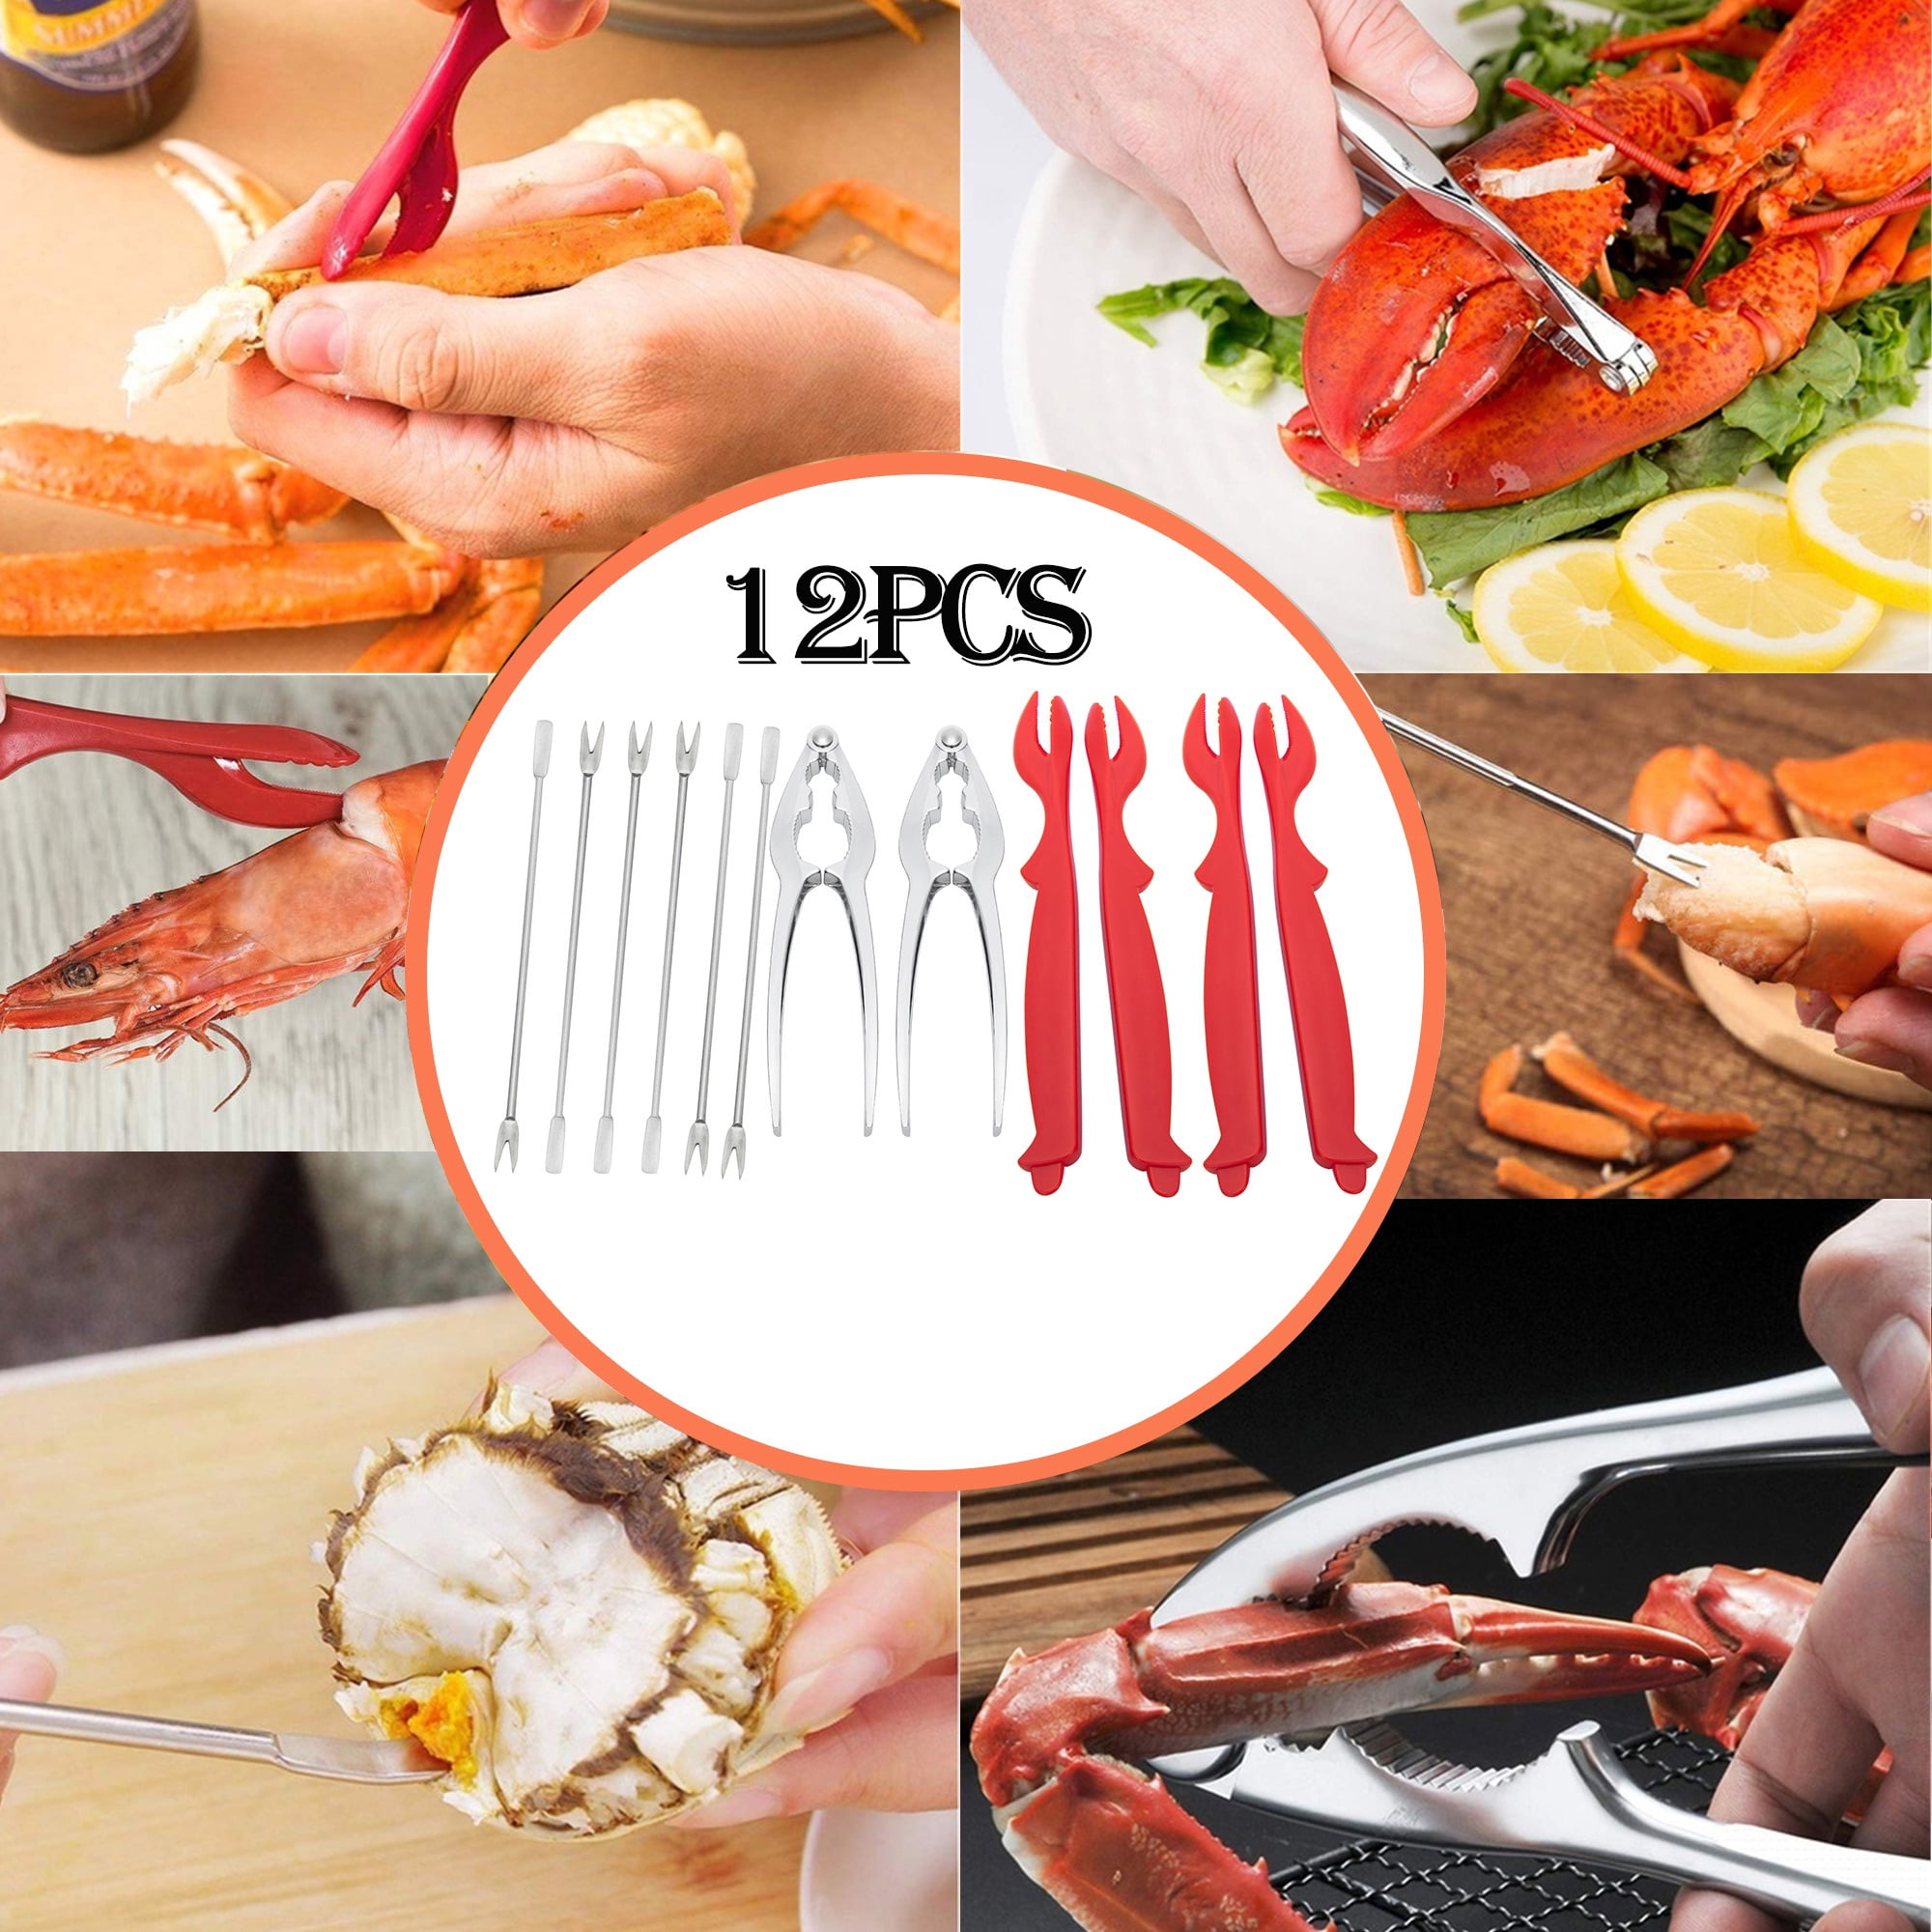 Crab Leg Crackers and Seafood Tool 2 Pcs Stainless Steel Seafood Forks /& Picks Nut Cracker Set Dishwasher-Safe Included 4 Pcs Crab Leg Cracker Tools